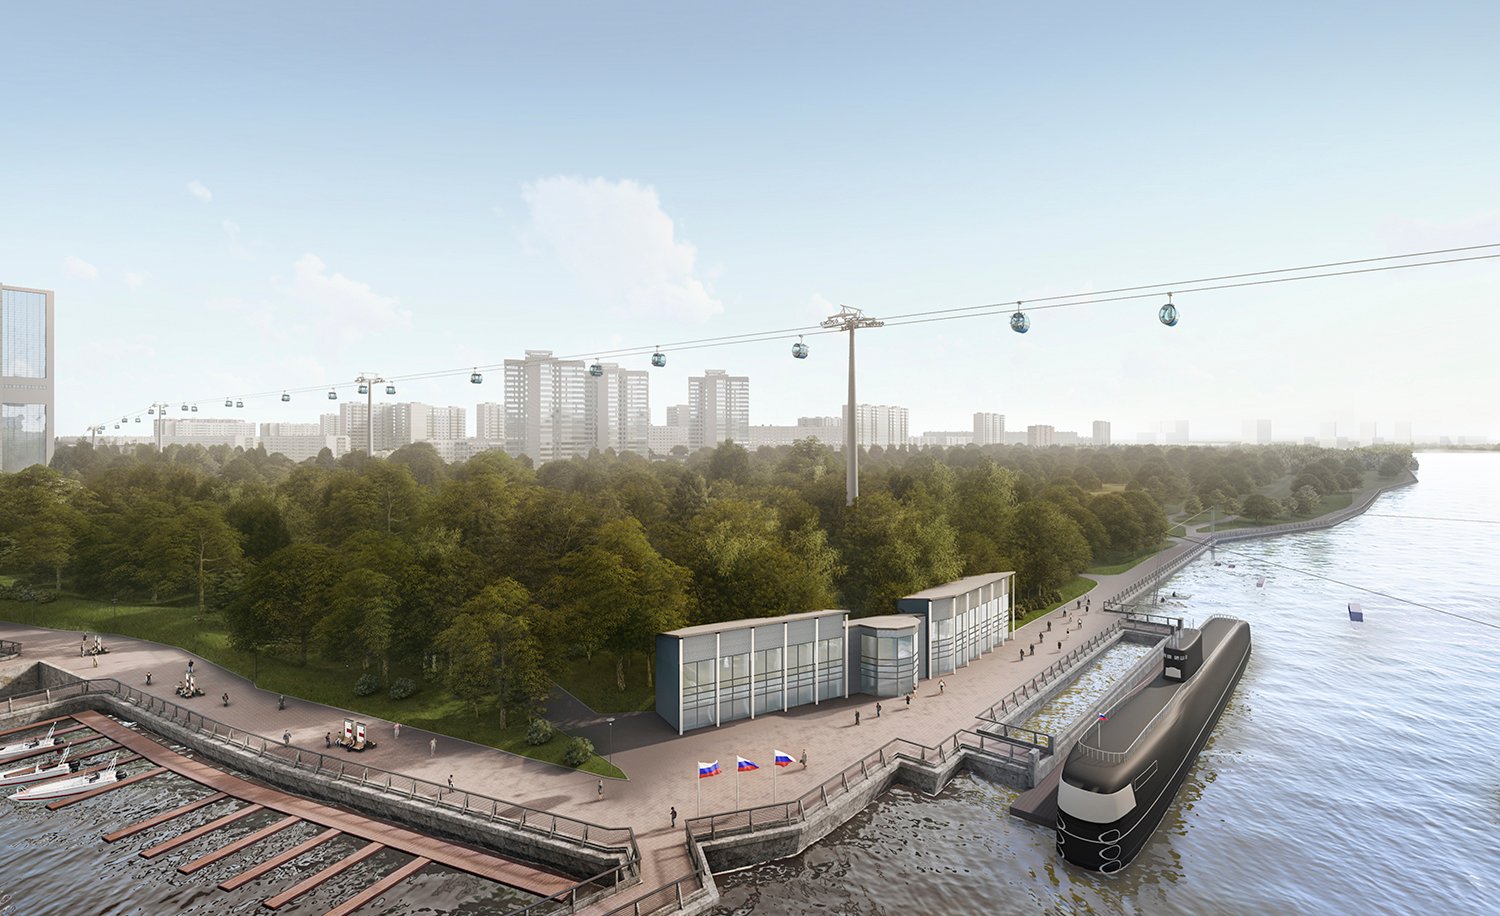 State Research and Design Institute for Urban Development of the City of Moscow